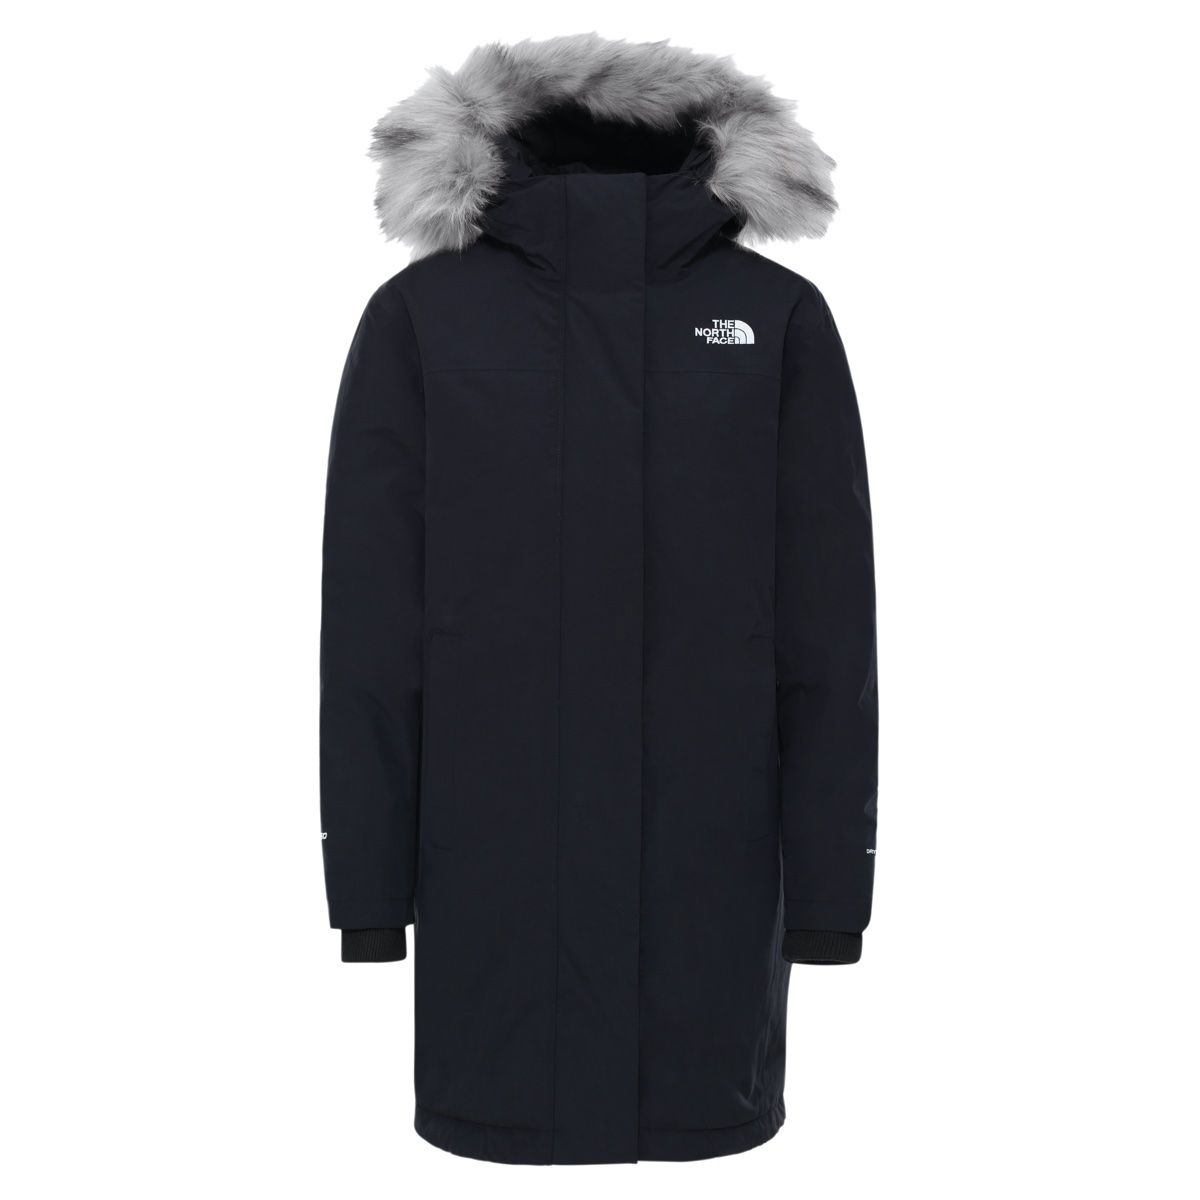 The North Face Arctic Parka Insulated Women's Jacket | TNF Black